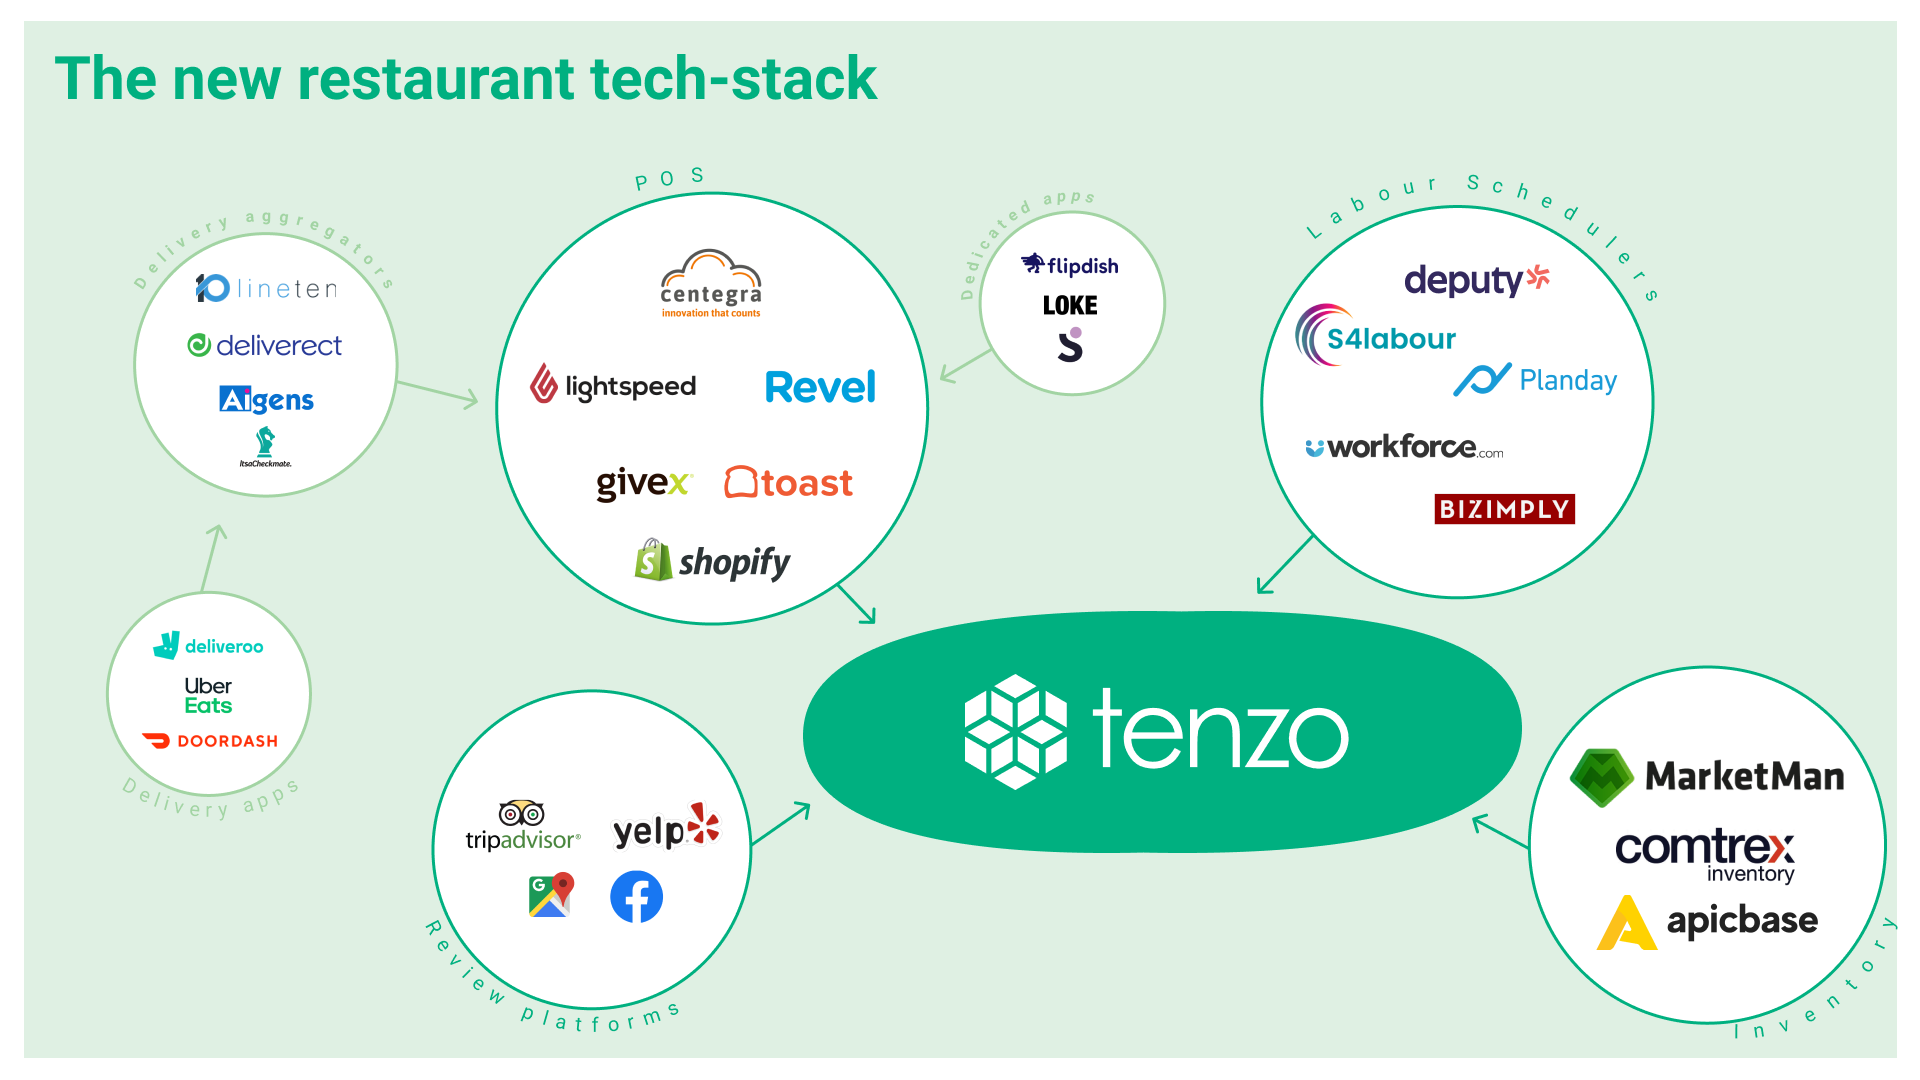 The new restaurant tech stack